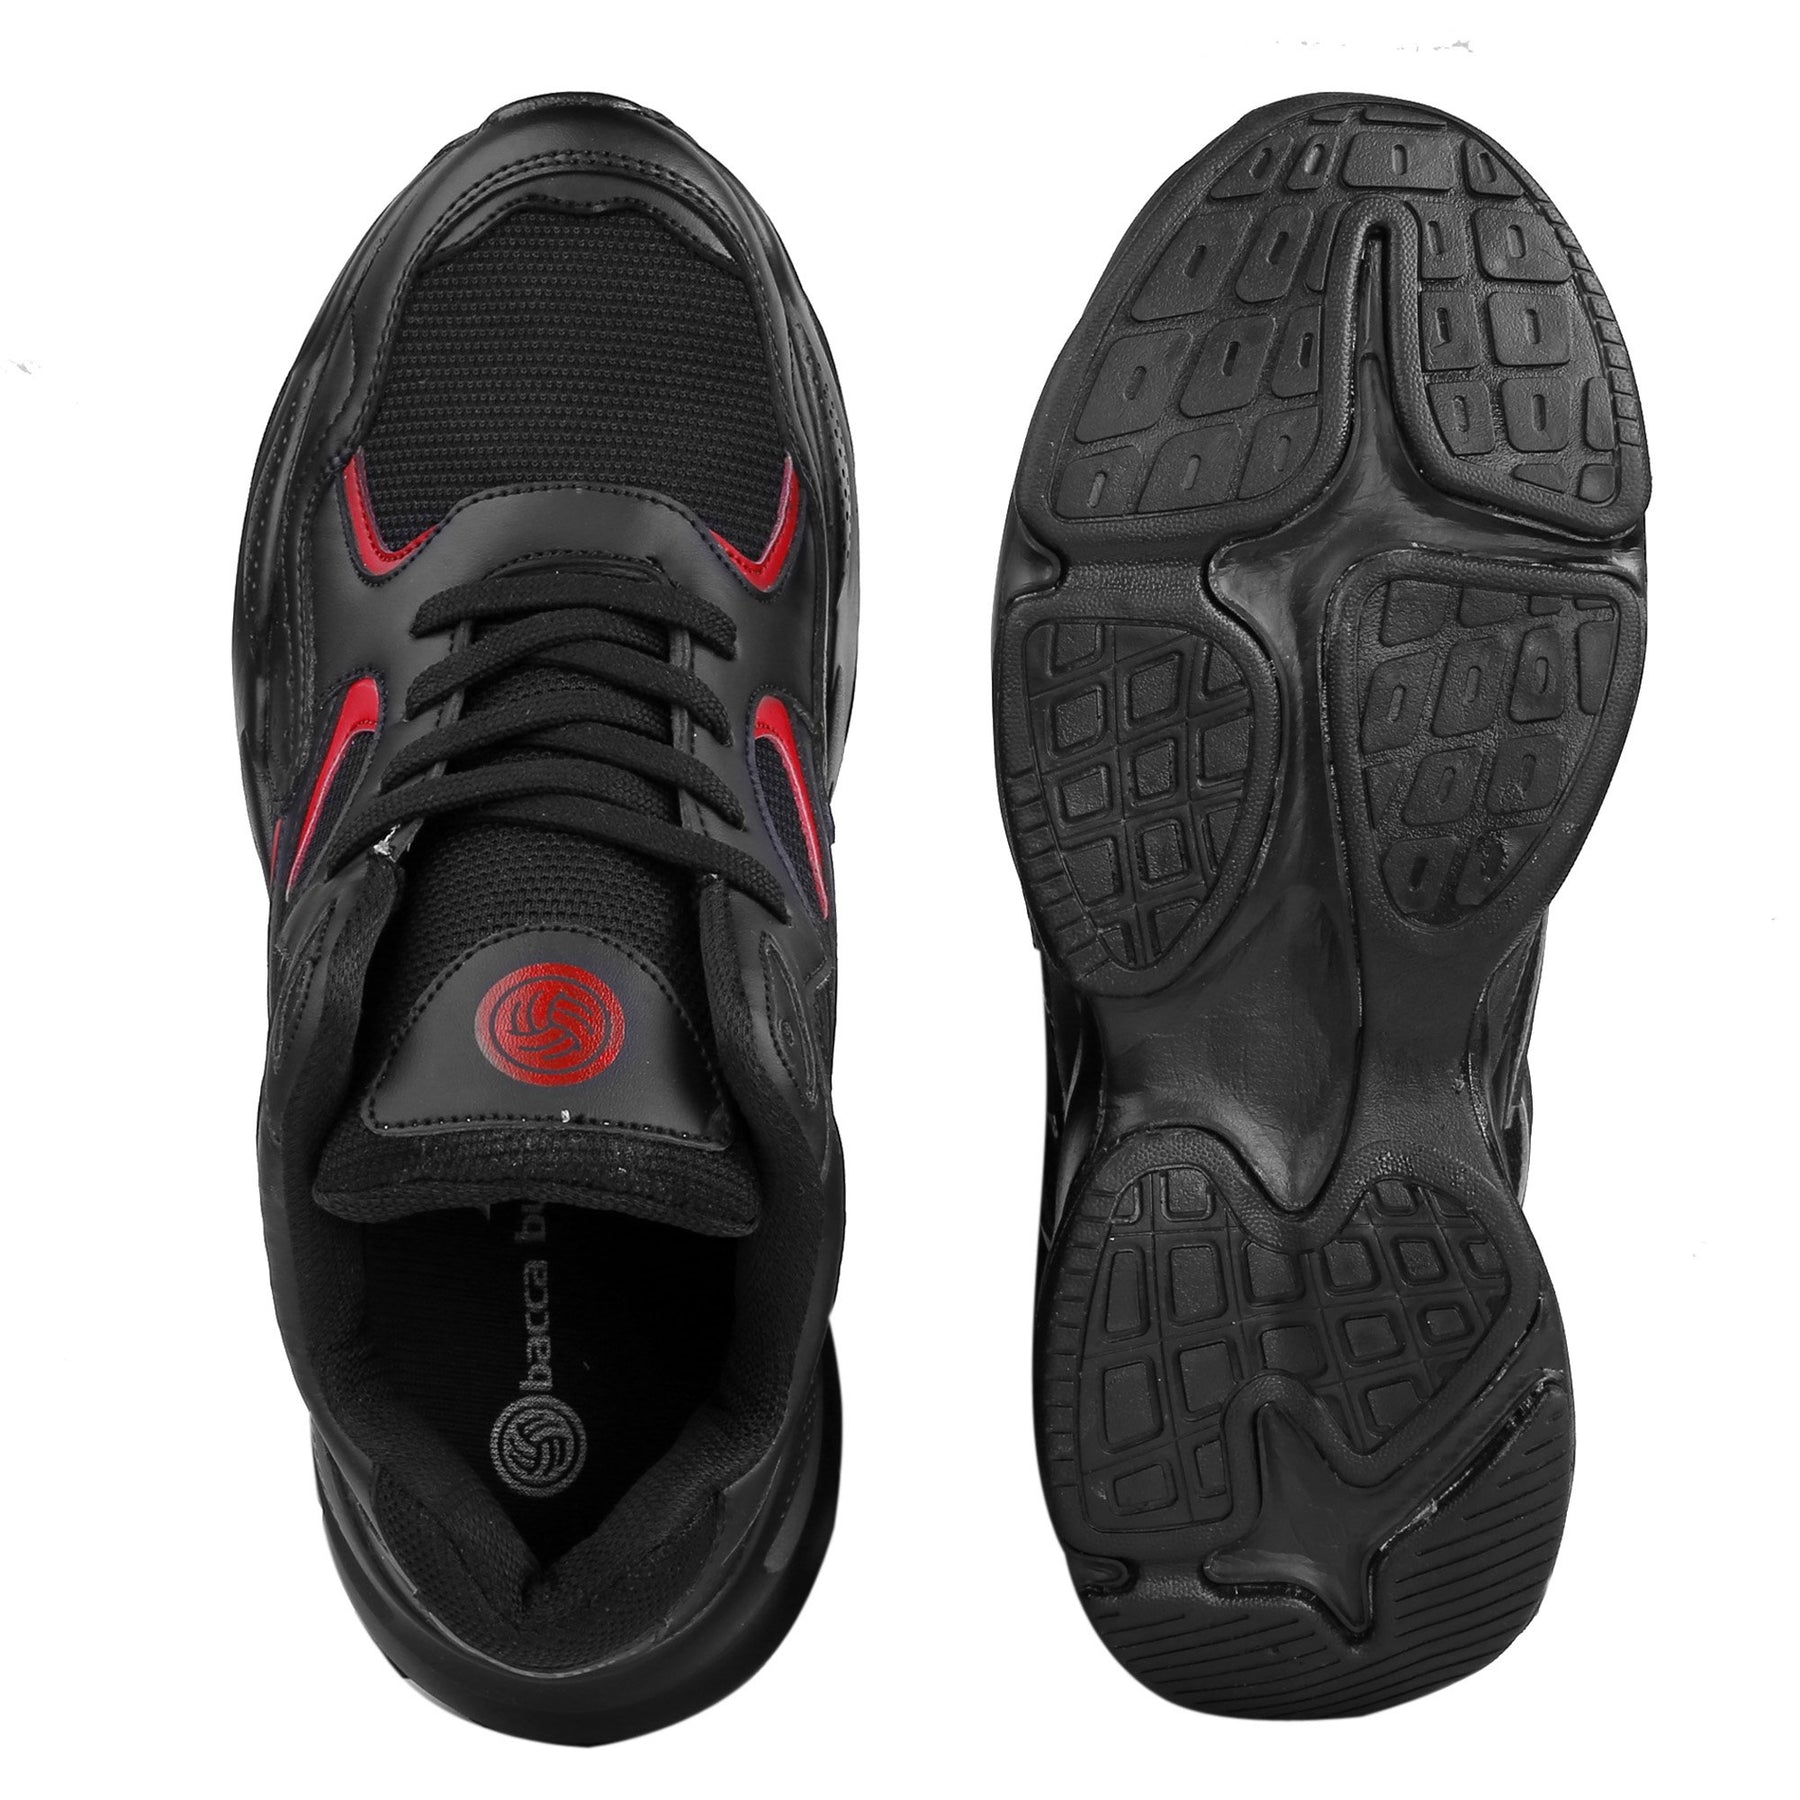 Bacca Bucci ZEUS Sneakers/Running Shoes with Chunky Rubber Outsole